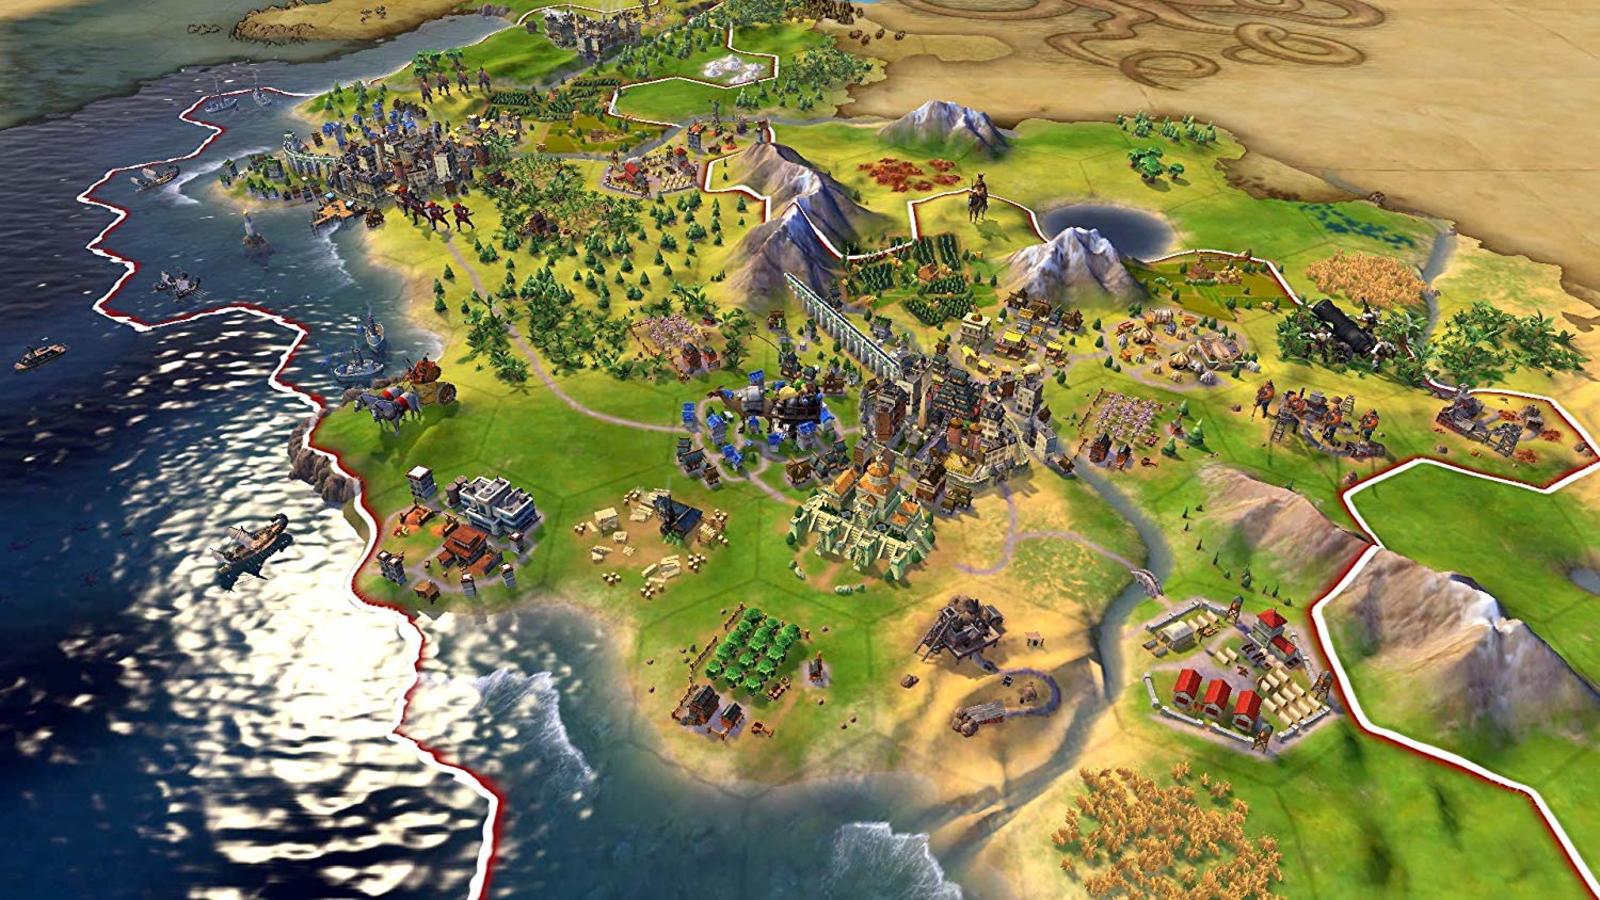 Civilization VI is the best strategy game on Nintendo Switch